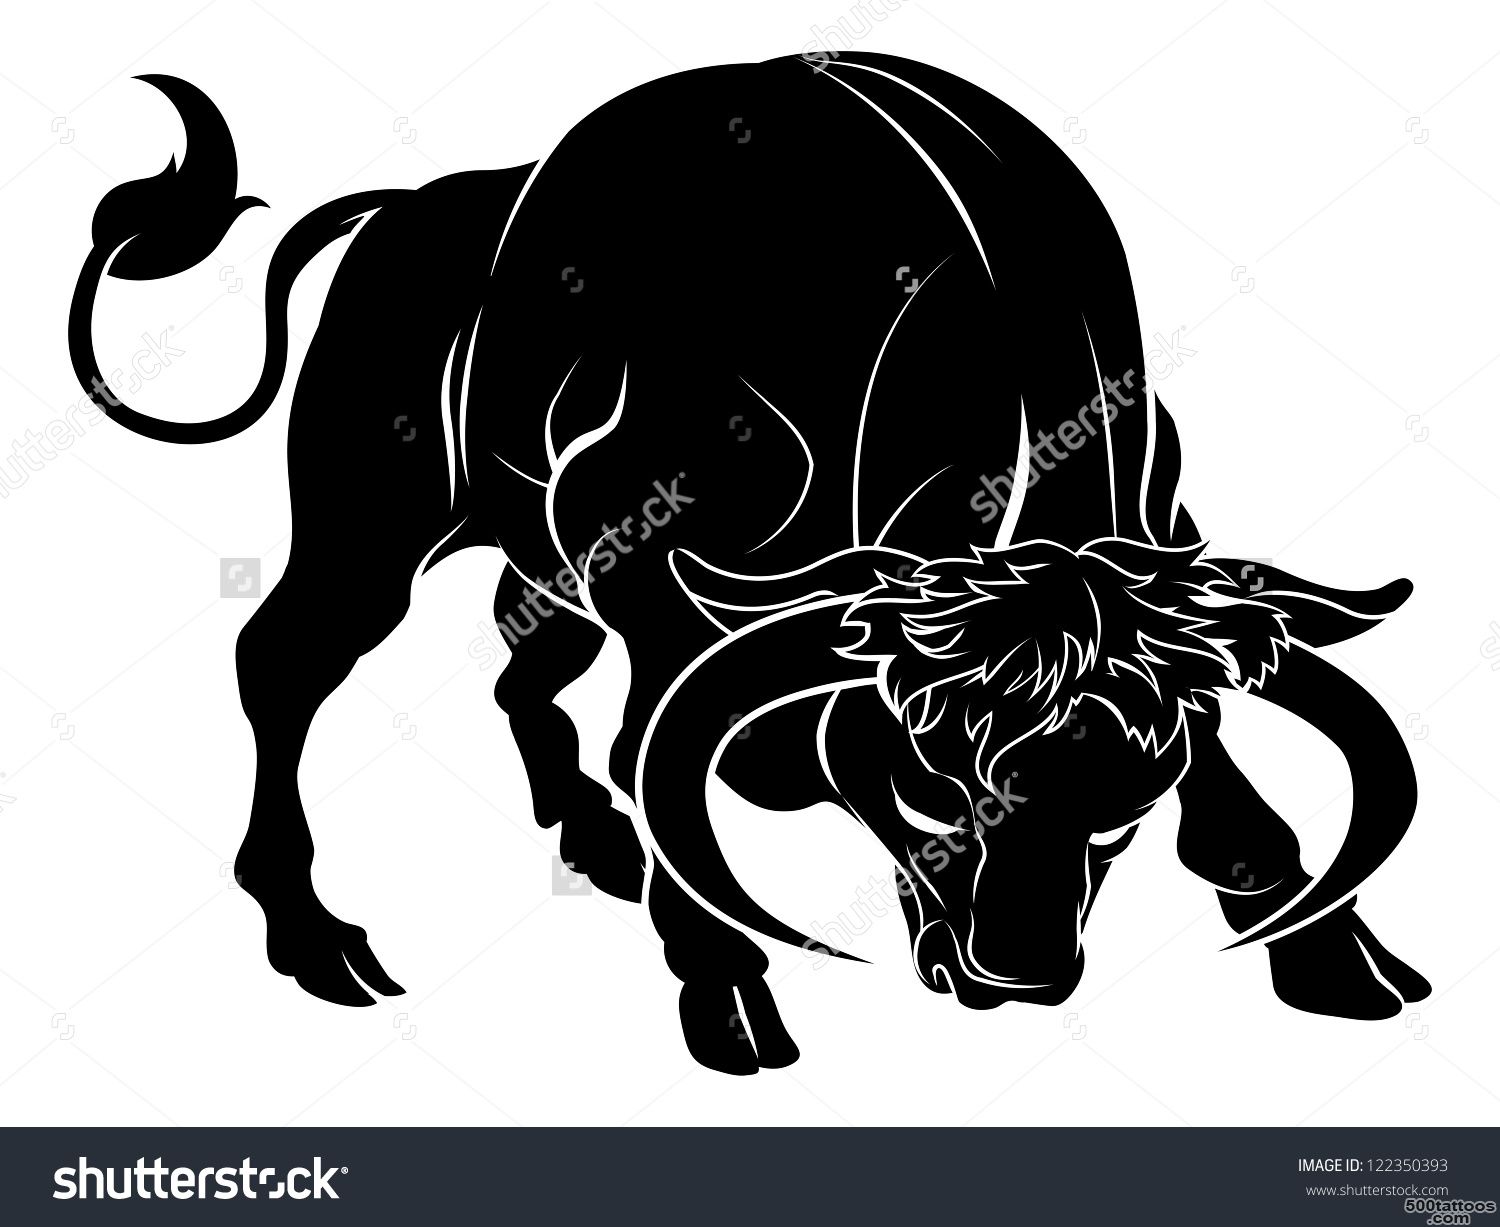 An Illustration Of A Stylised Black Bull Perhaps A Bull Tattoo ..._44